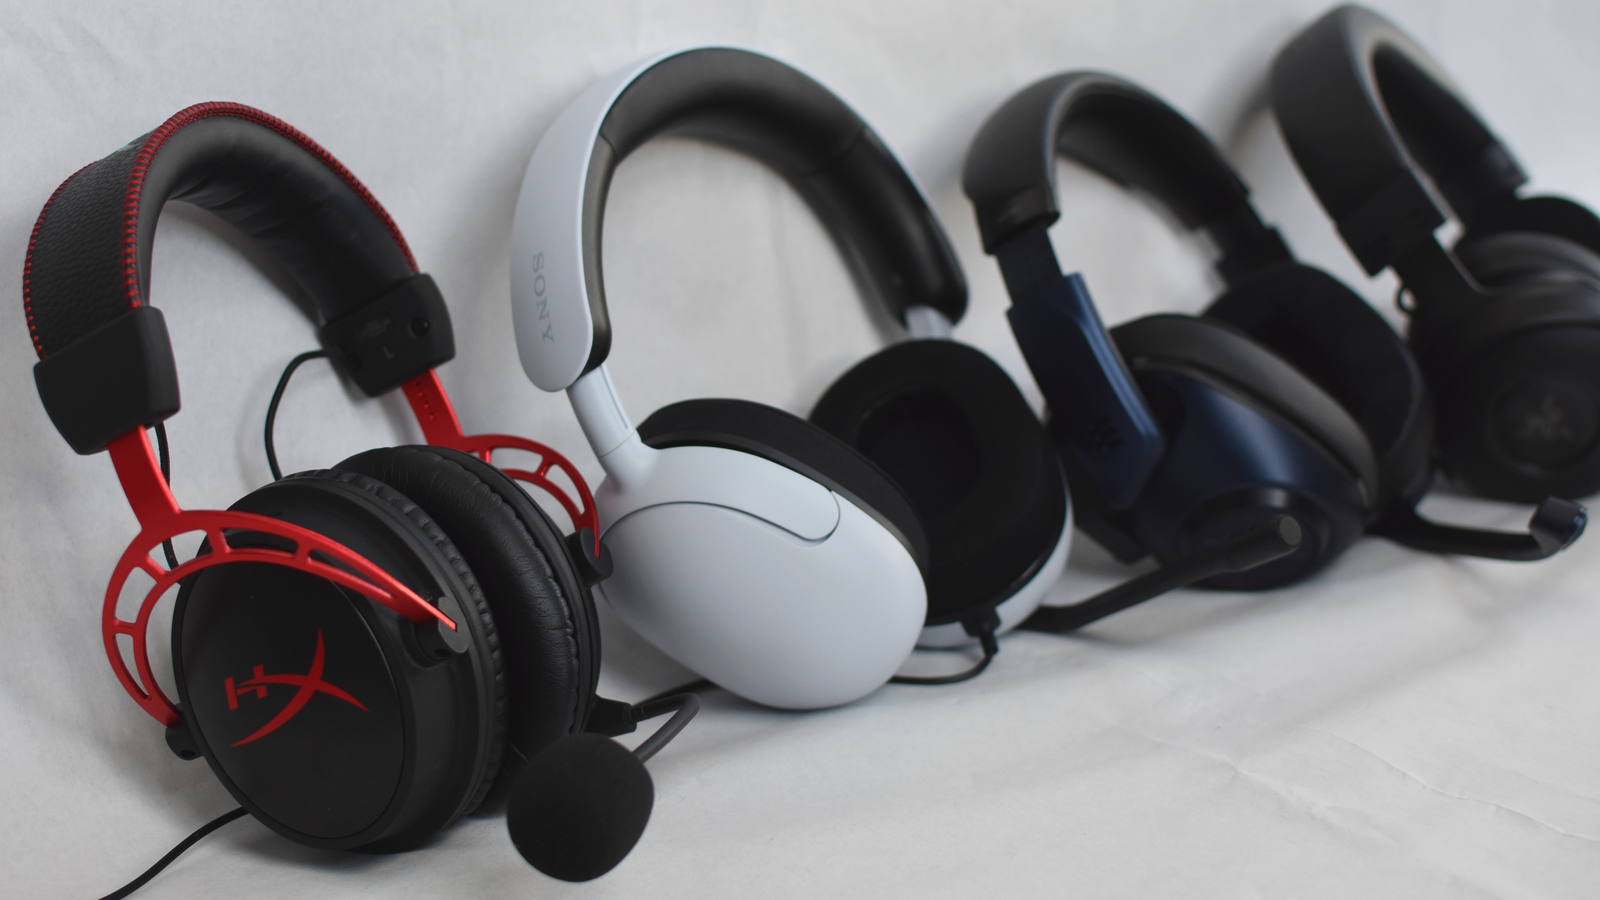 Astro A50 headset review: Quality at a great cost for PS5 users